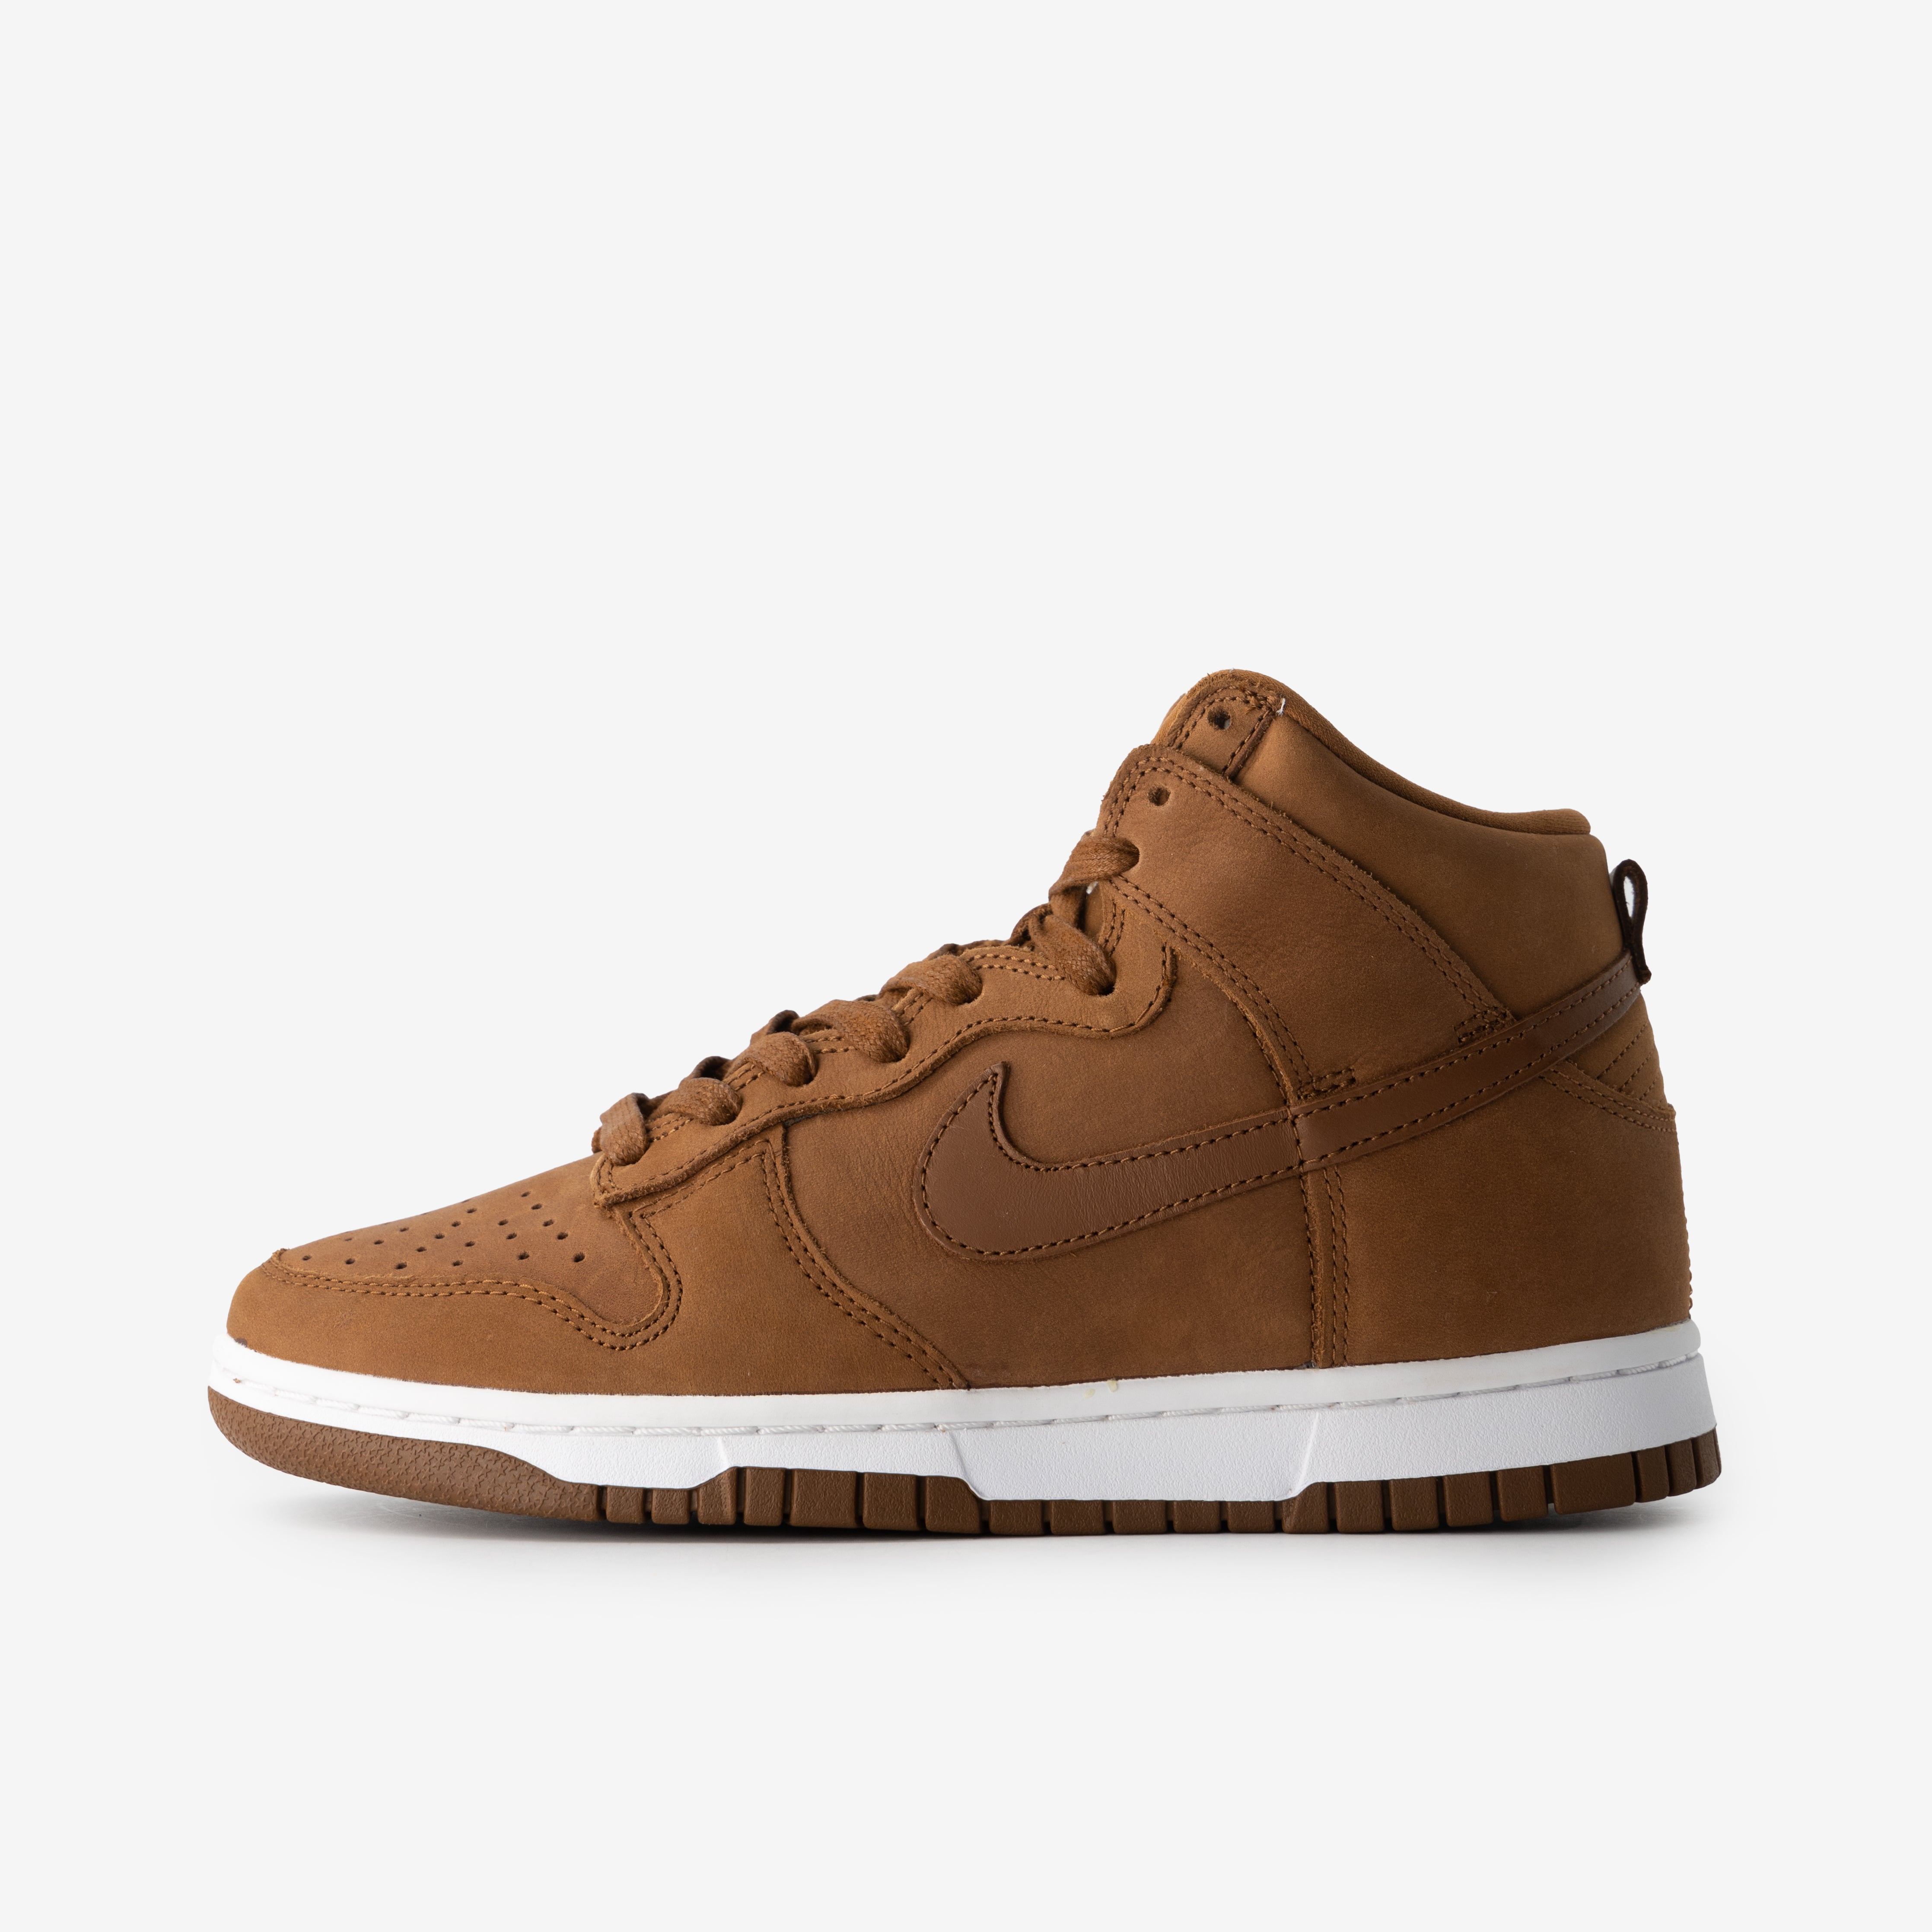 Men's shoes Nike Dunk High Retro White/ Gym Red-Yellow Ochre-Gum Med Brown